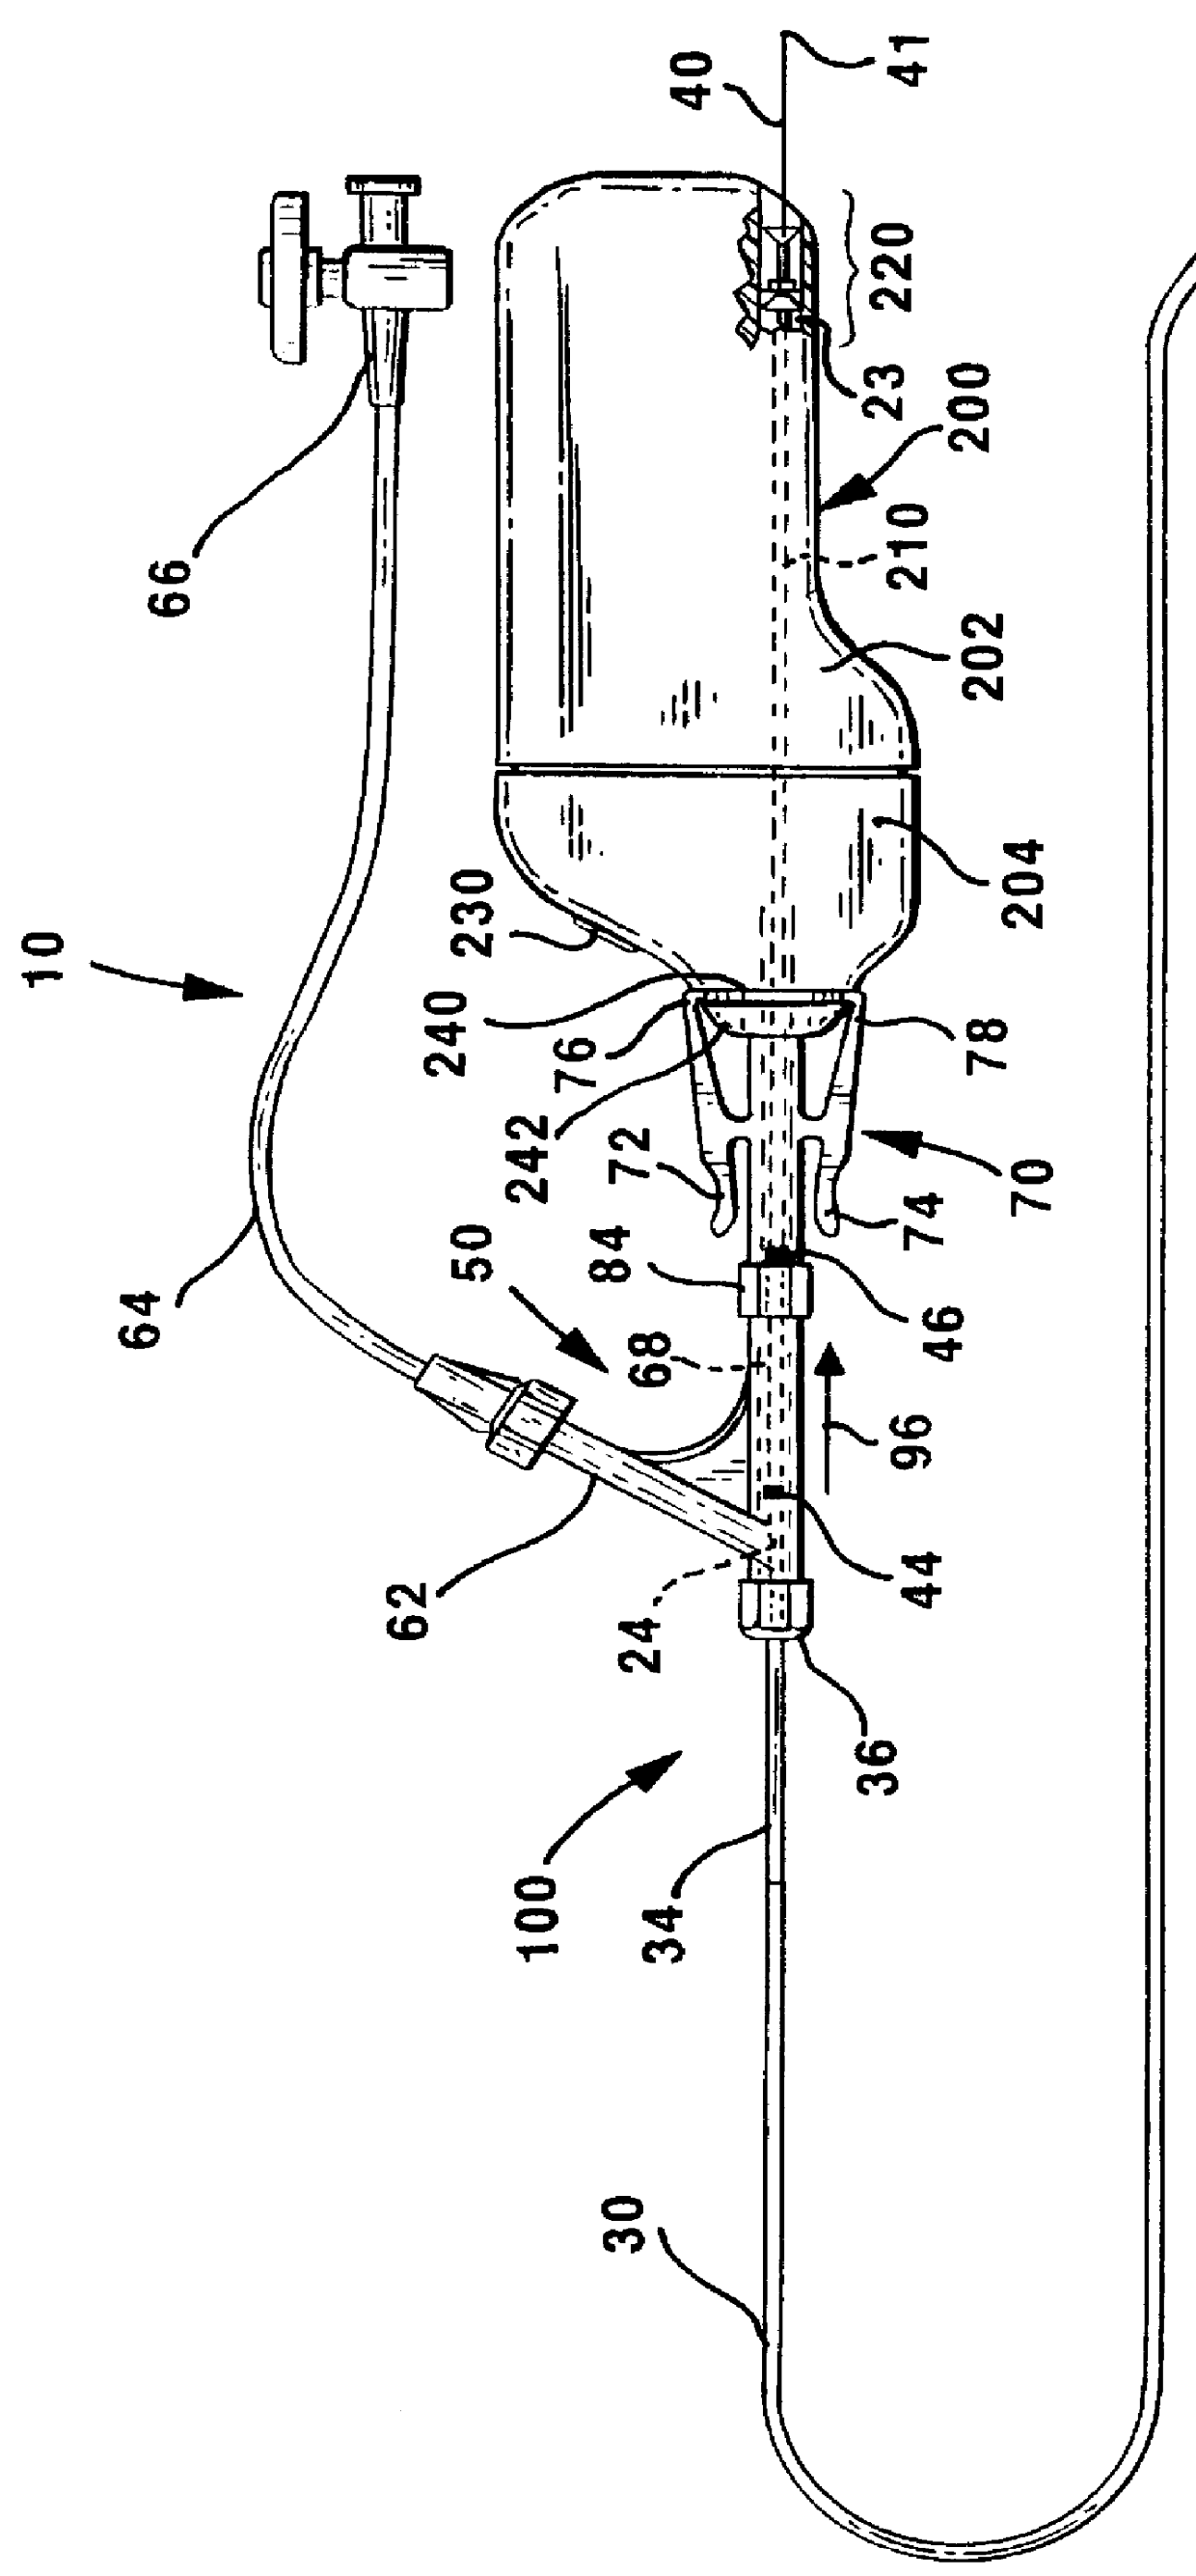 Rotatable attachment mechanism for attaching a medical obstruction treatment device sub-assembly to a drive motor unit